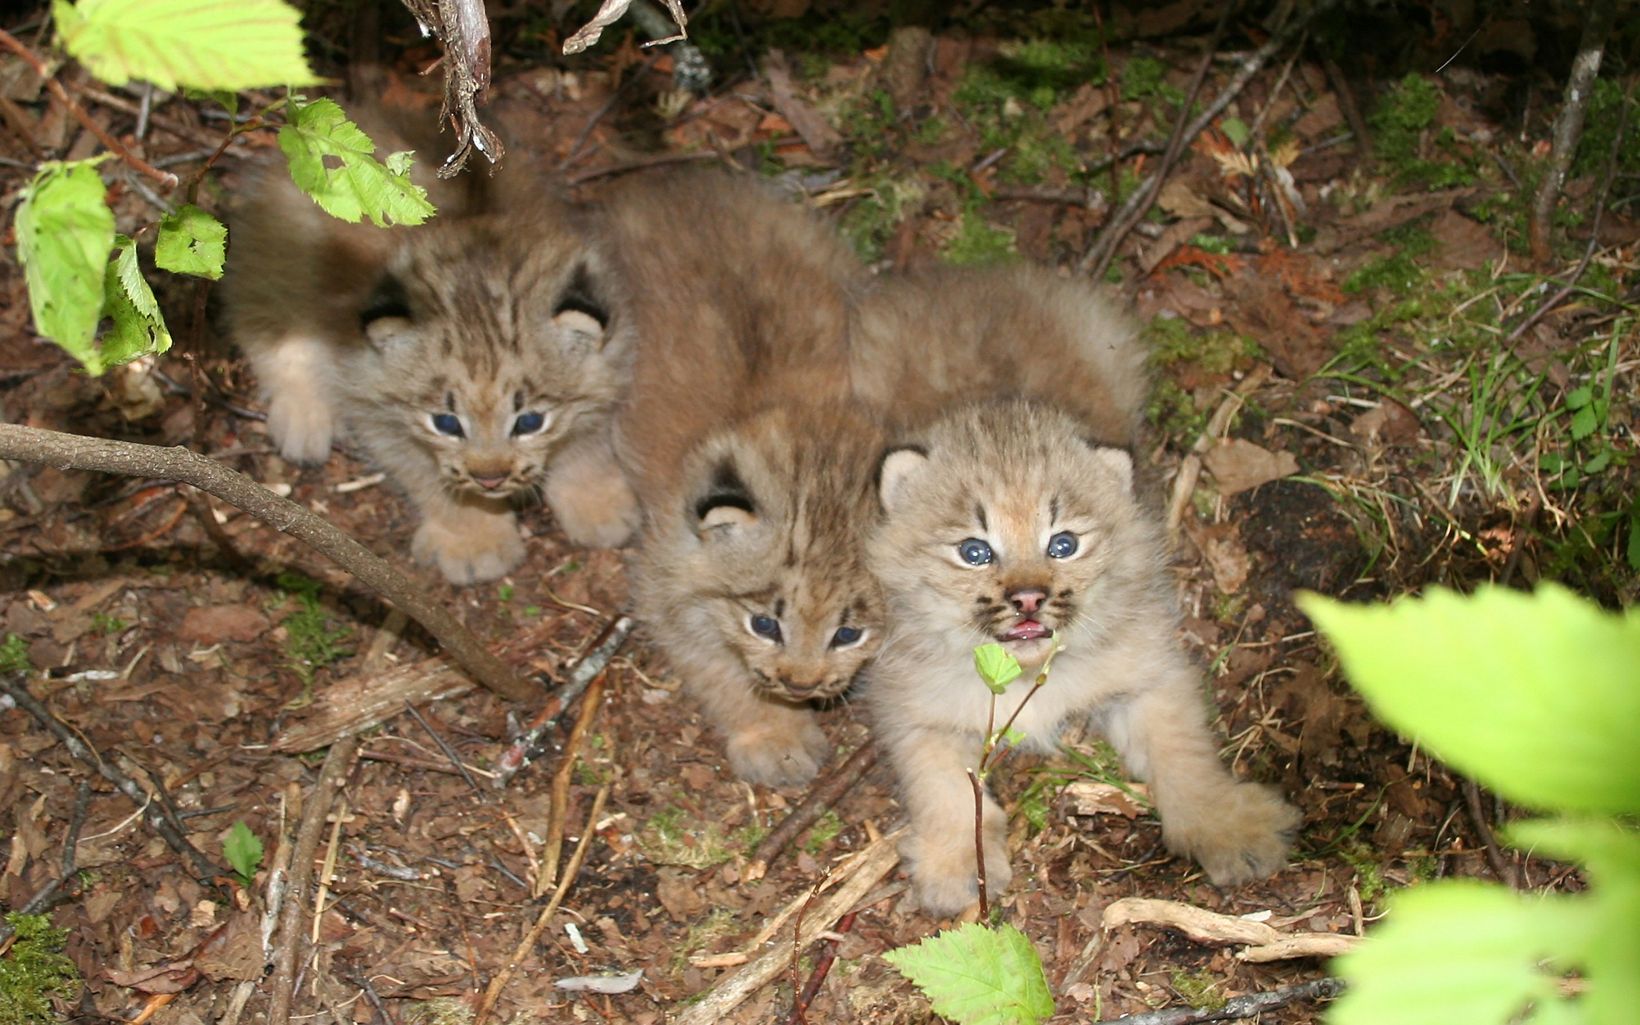 Lynx Kittens The St. John River Forest is known to provide habitat for this elusive species and periodically a fortunate visitor will spot one. © Peter Vickery